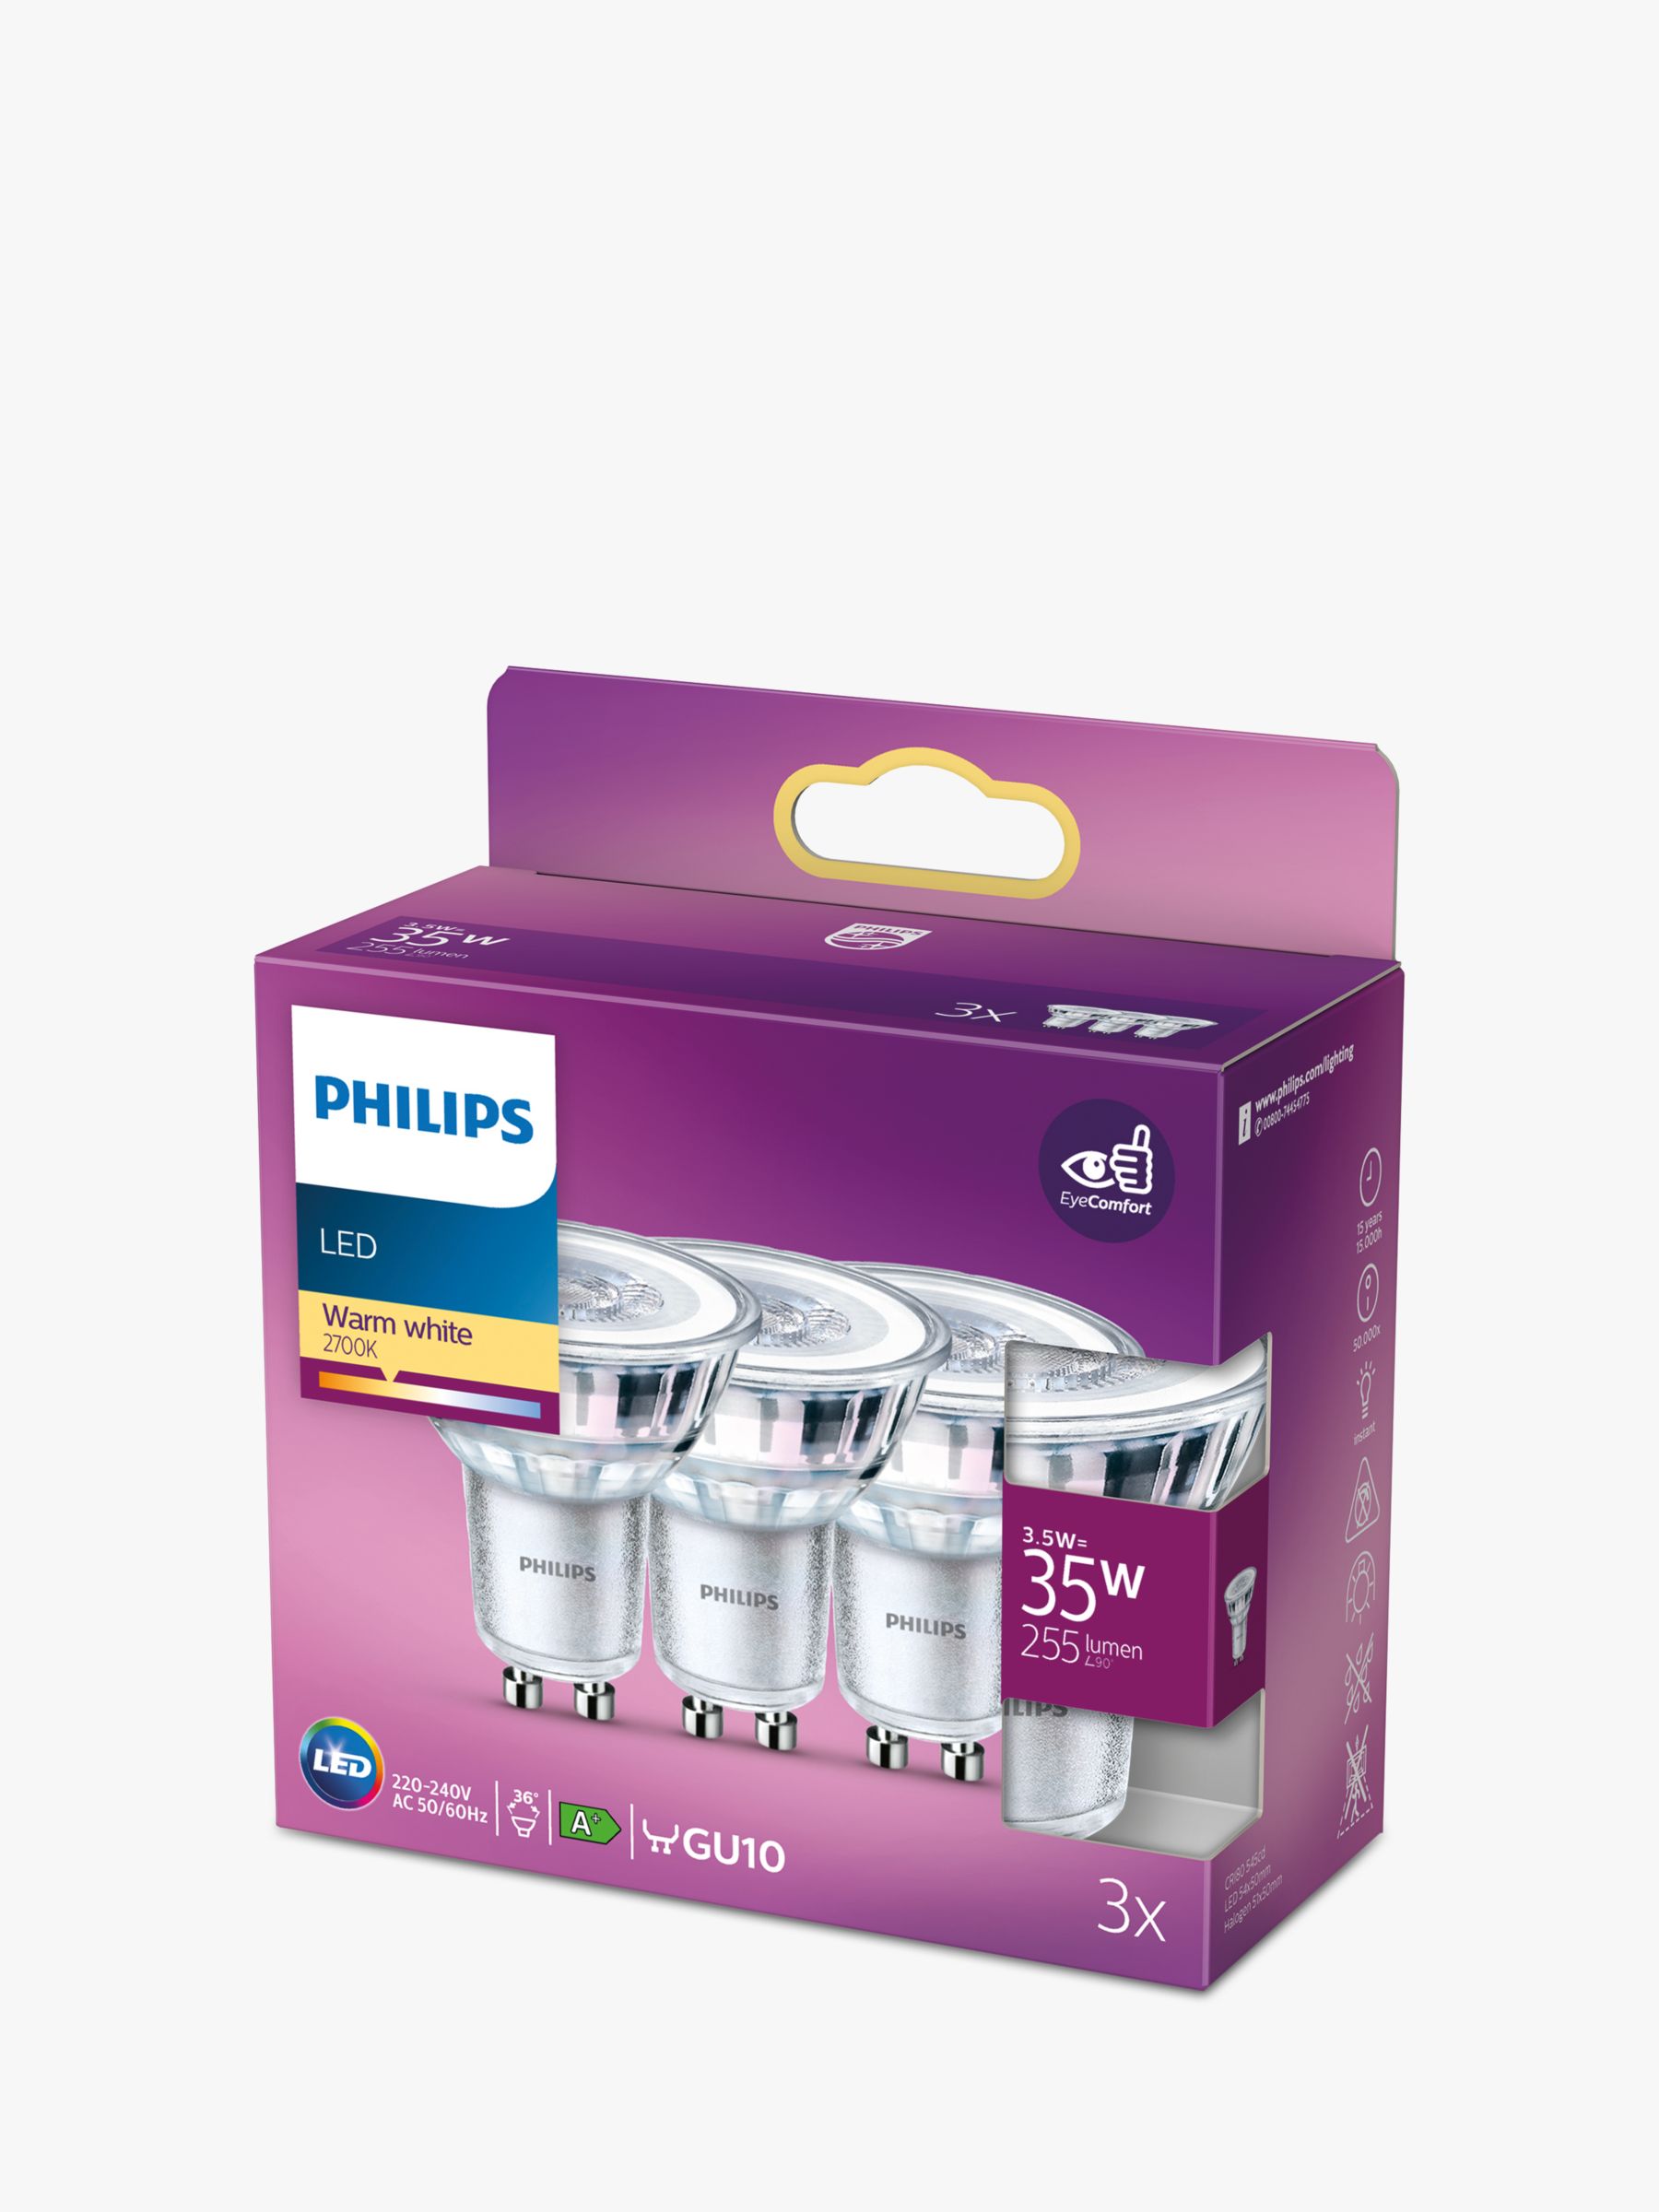 Stuwkracht worm Tot stand brengen Philips 3.5W GU10 LED Non-Dimmable Light Bulbs, Pack of 3, Clear